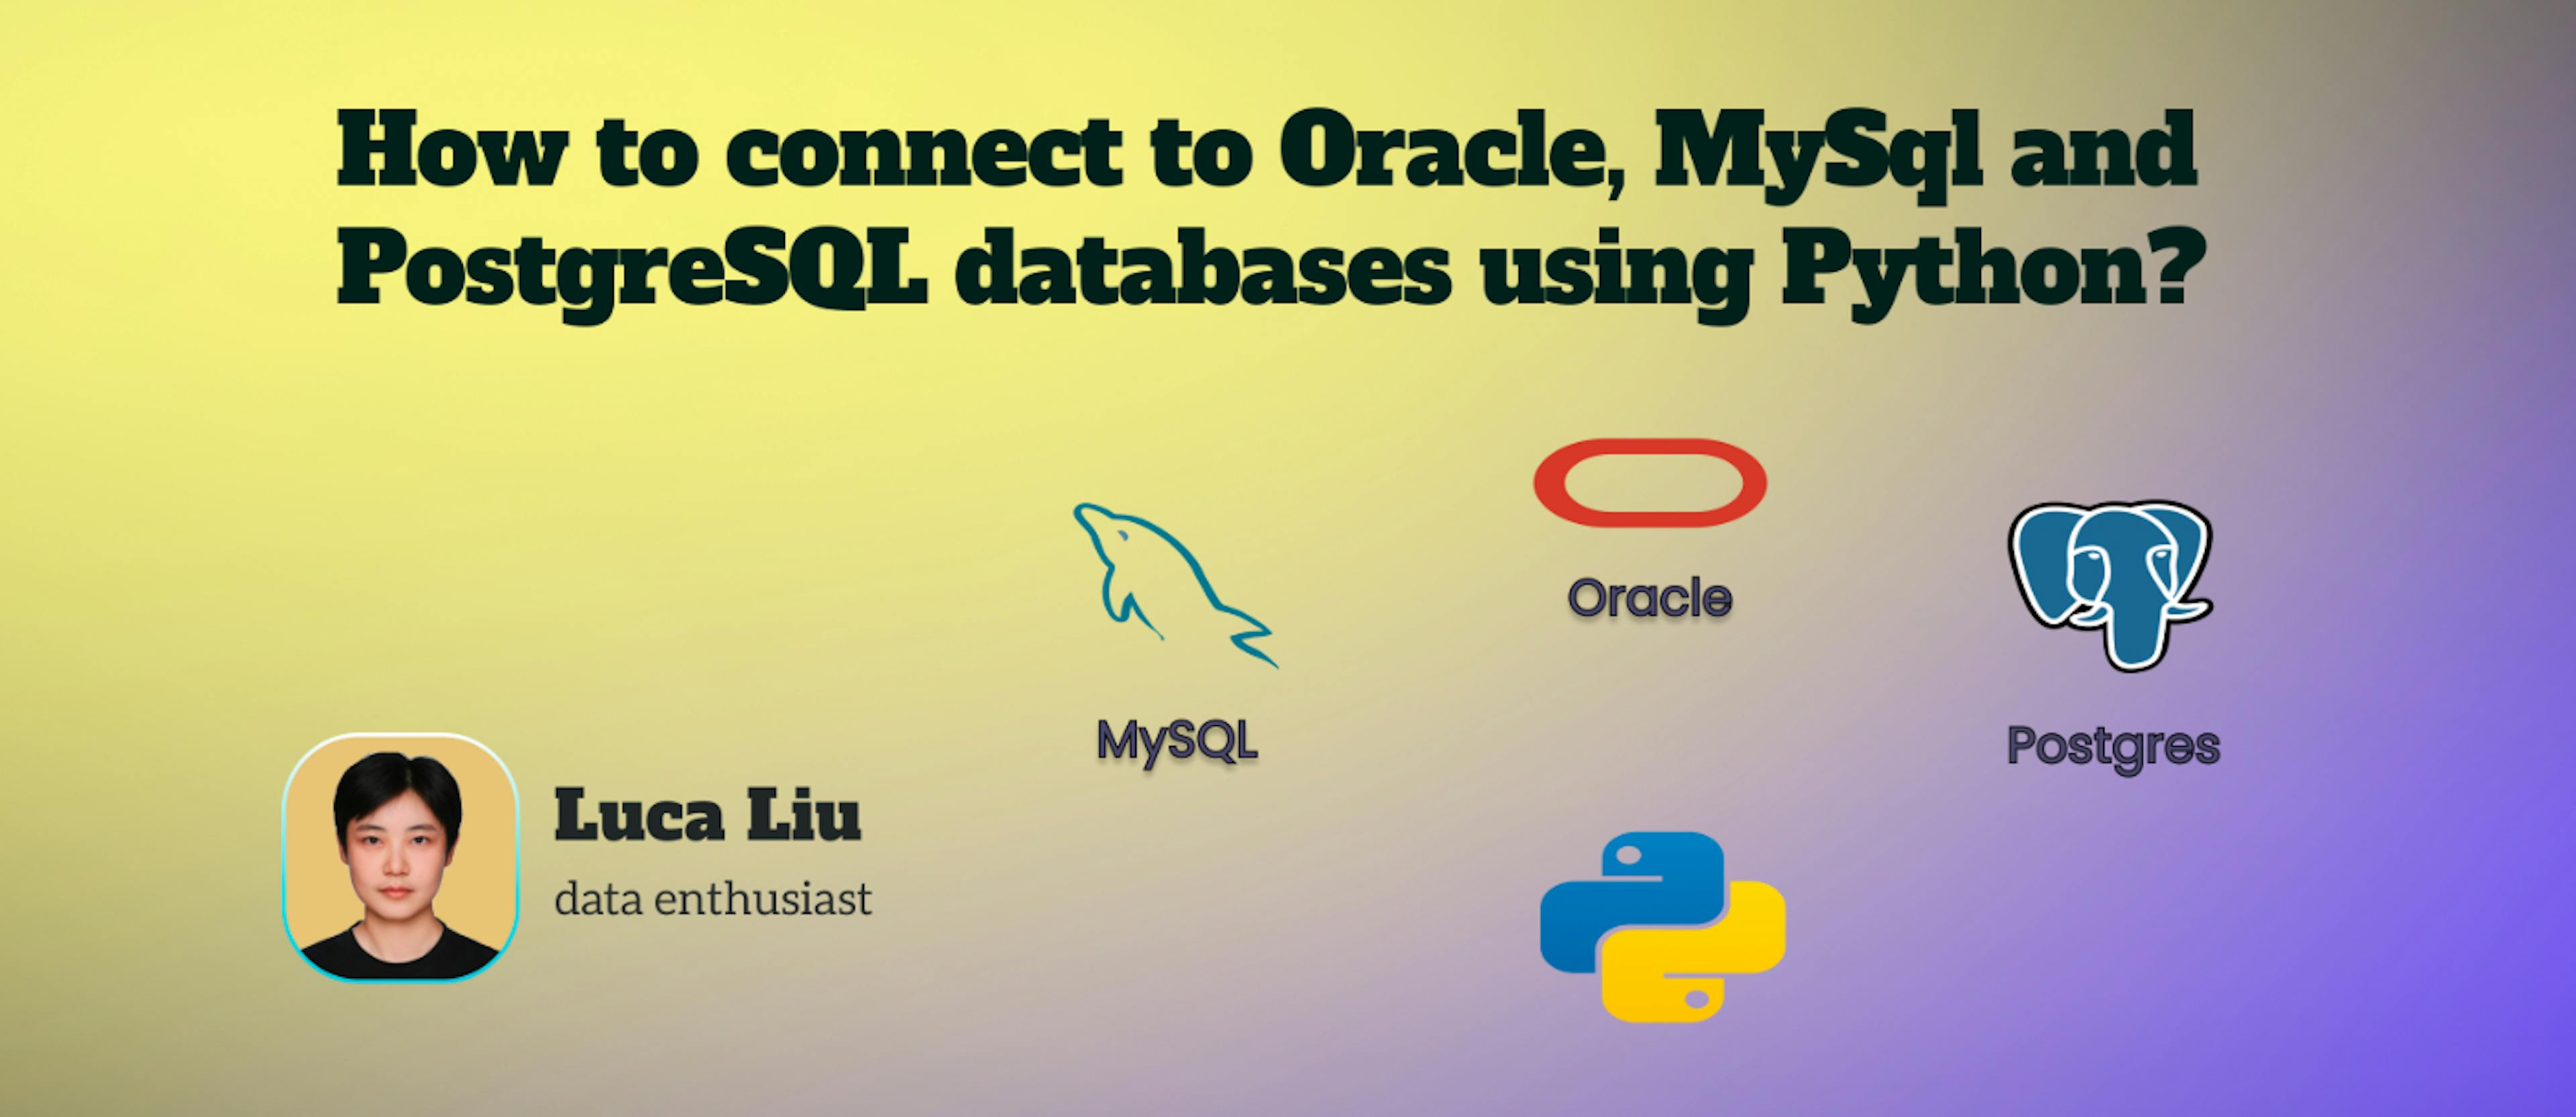 featured image - How to Connect to Oracle, MySql and PostgreSQL Databases Using Python